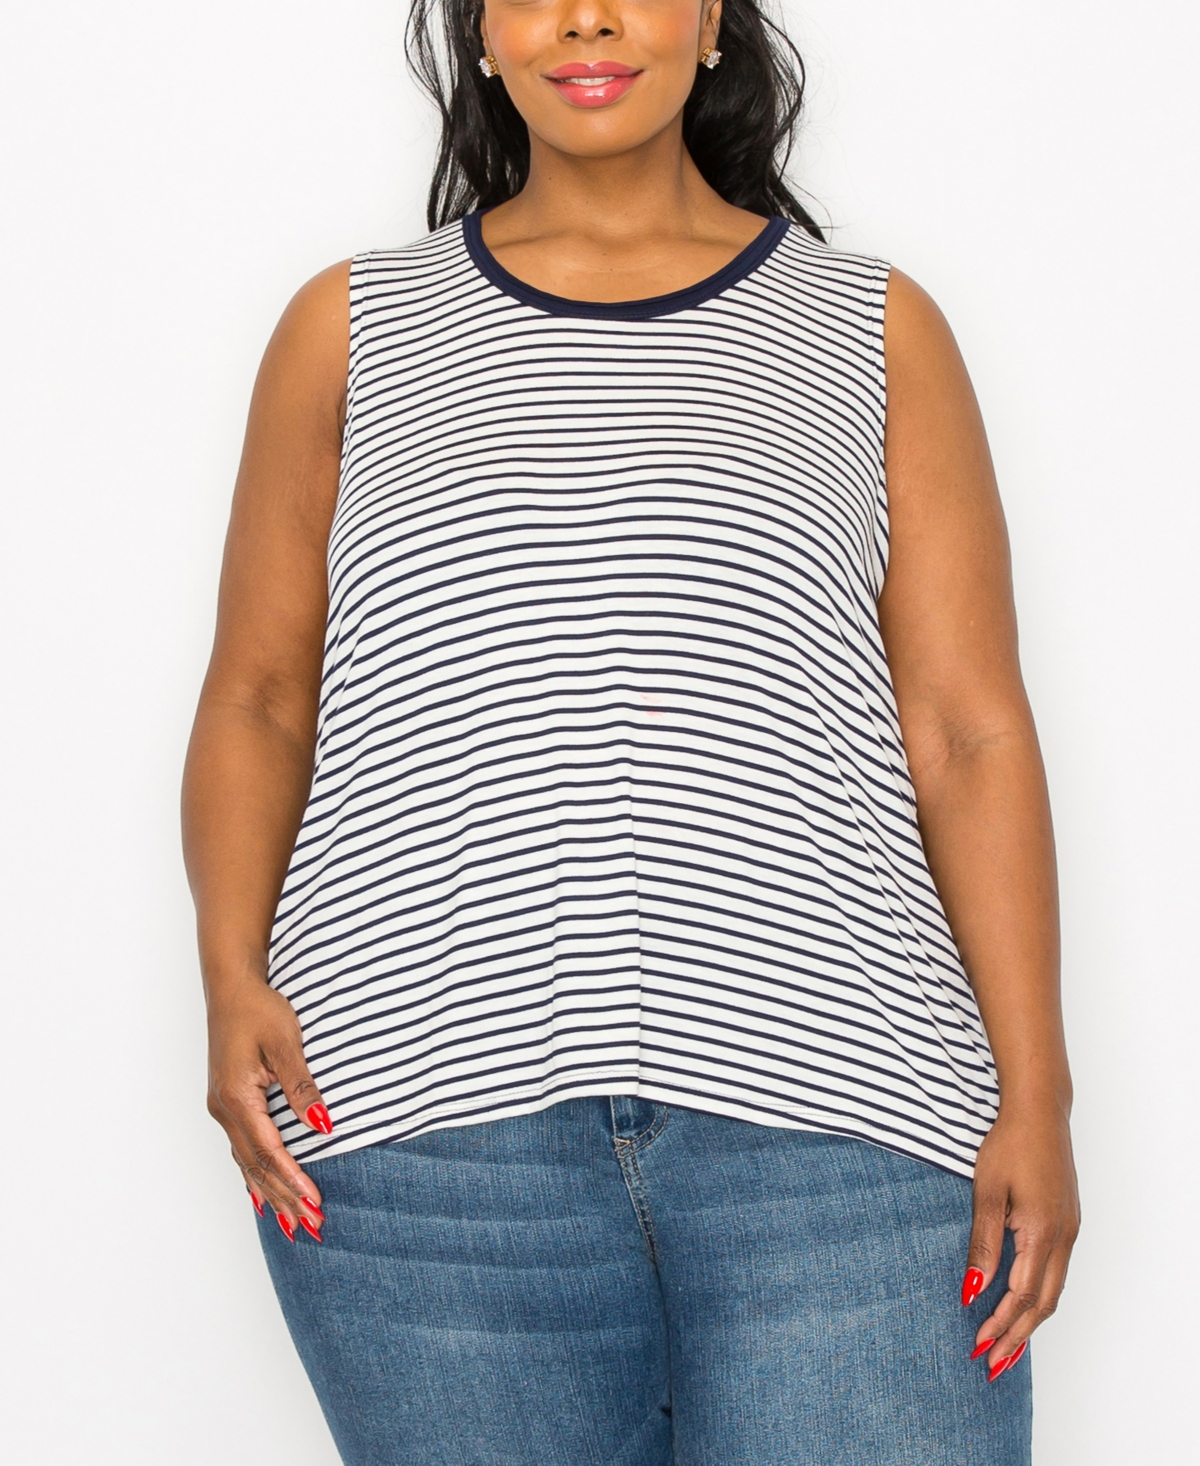 Shop Coin 1804 Plus Size Contrast Binding Tank Top In Ivory Navy